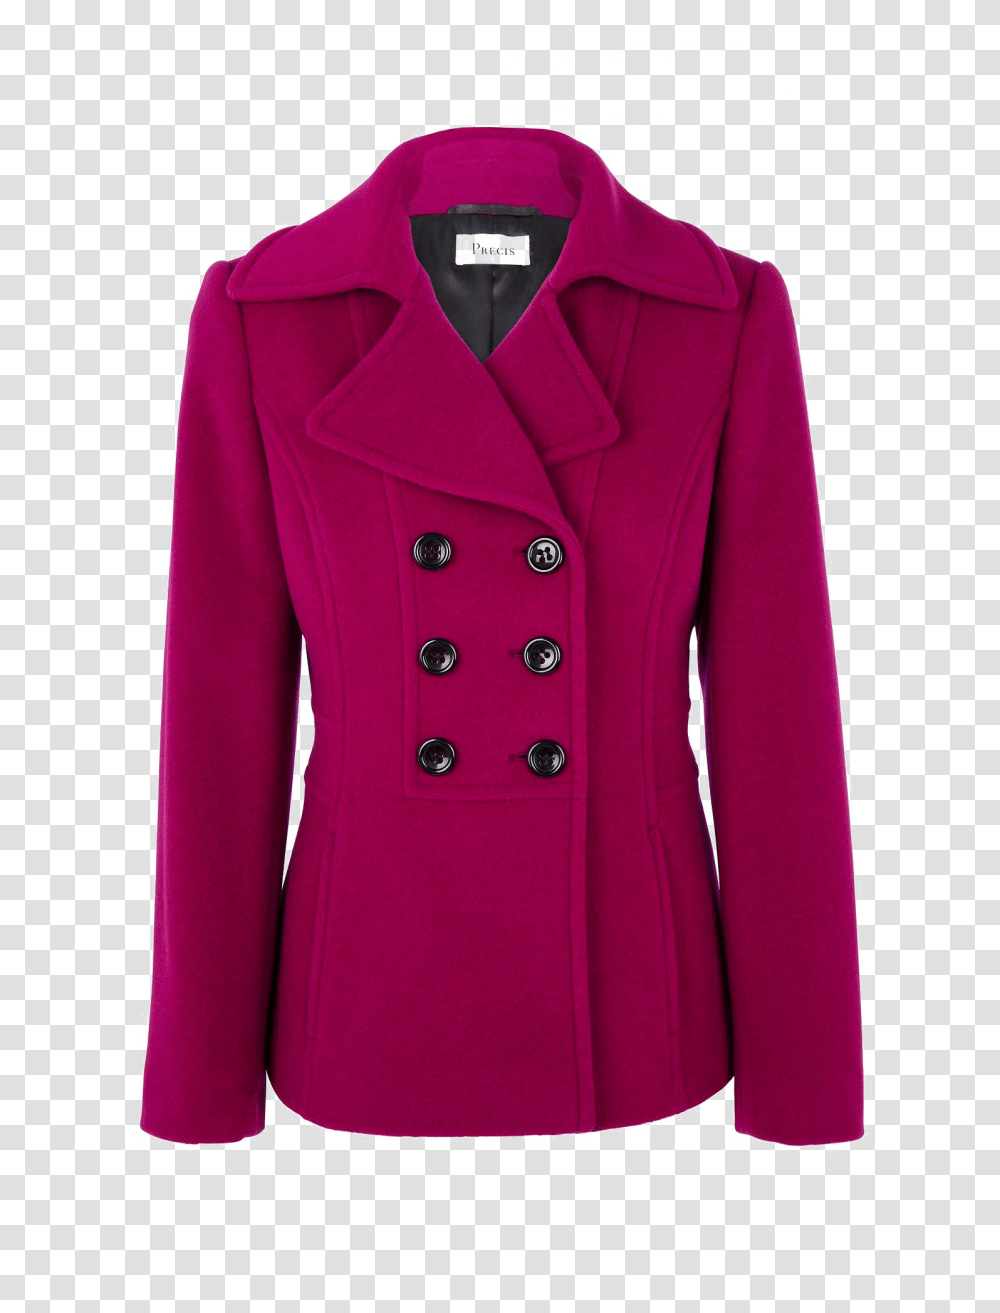 Short Coat For Women Image With Background Vector, Apparel, Overcoat, Trench Coat Transparent Png